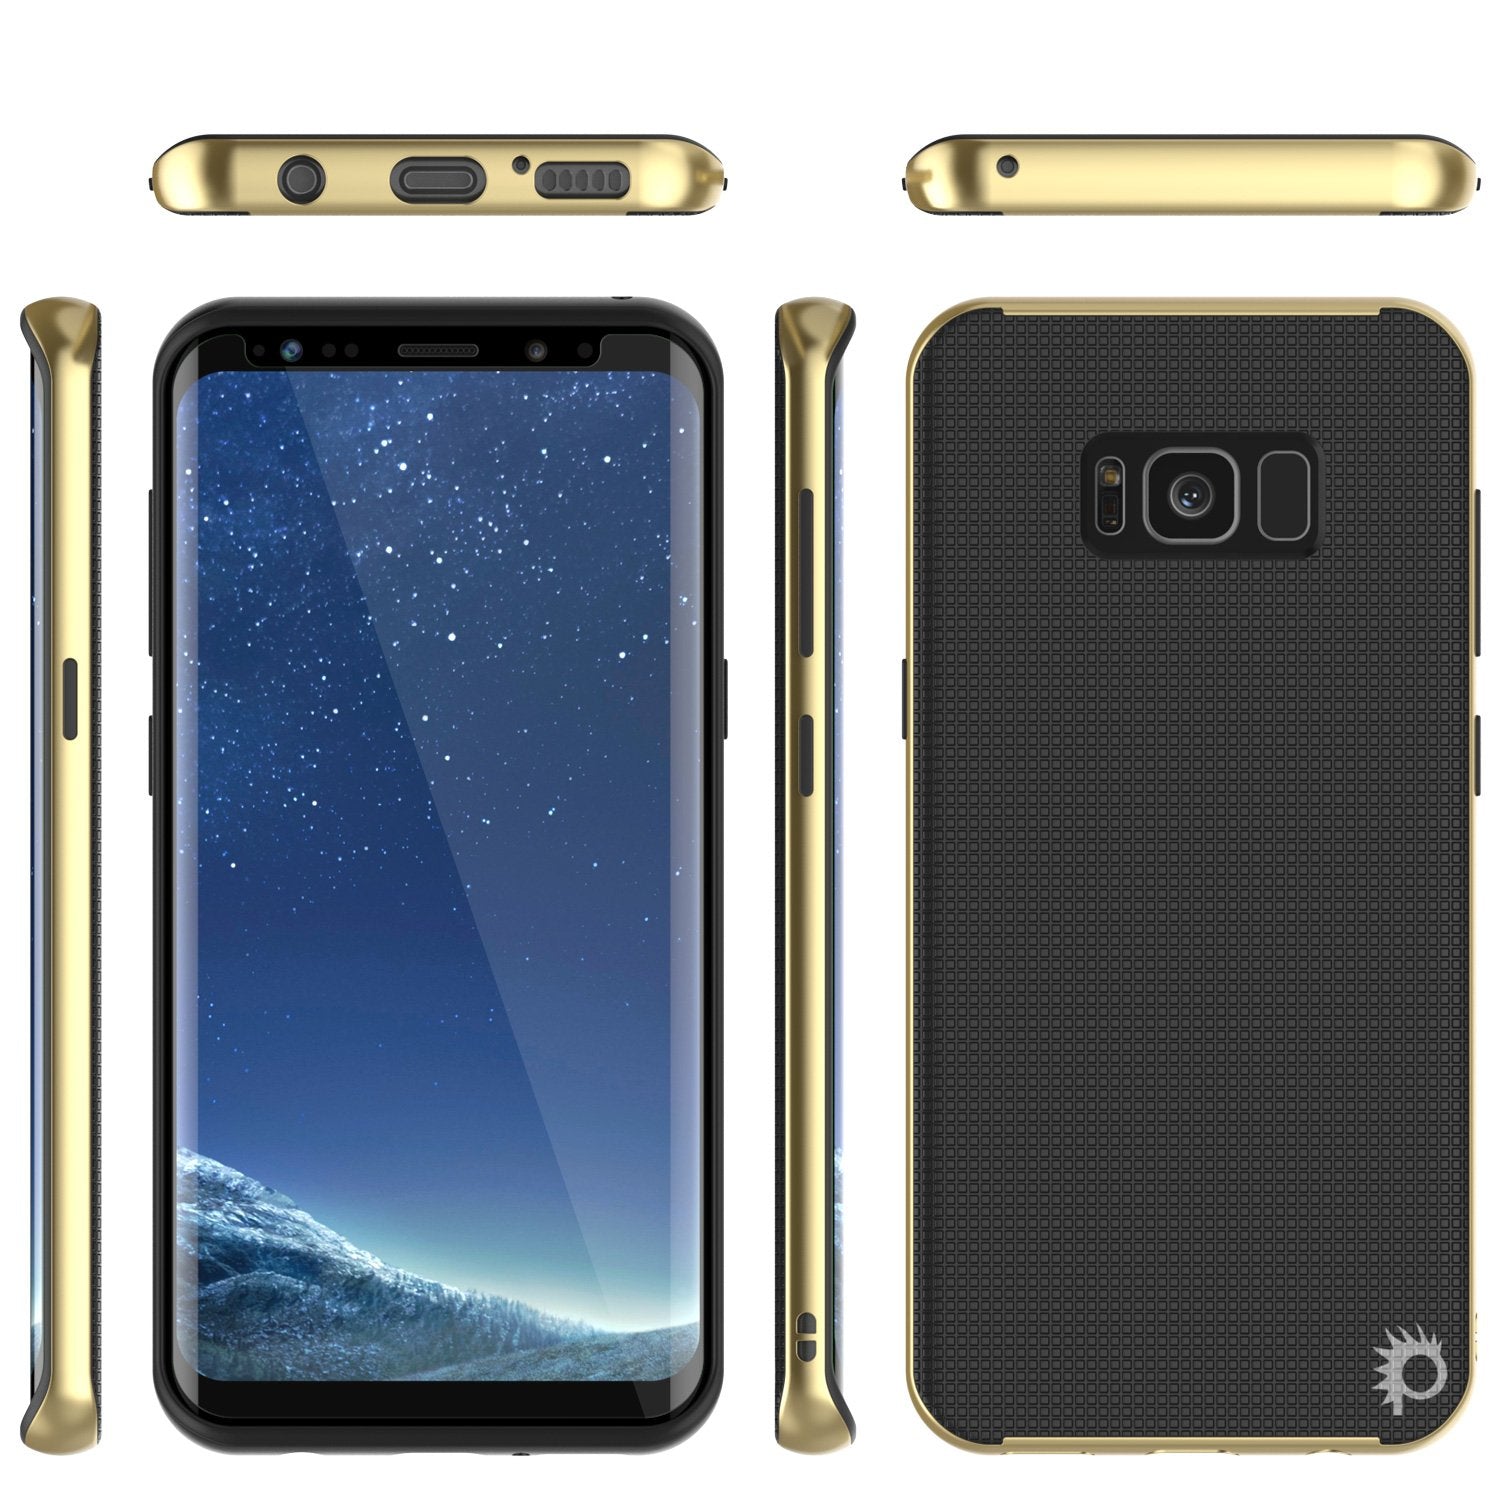 Galaxy S8 Case, PunkCase Stealth Gold Series Hybrid 3-Piece Shockproof Dual Layer Cover